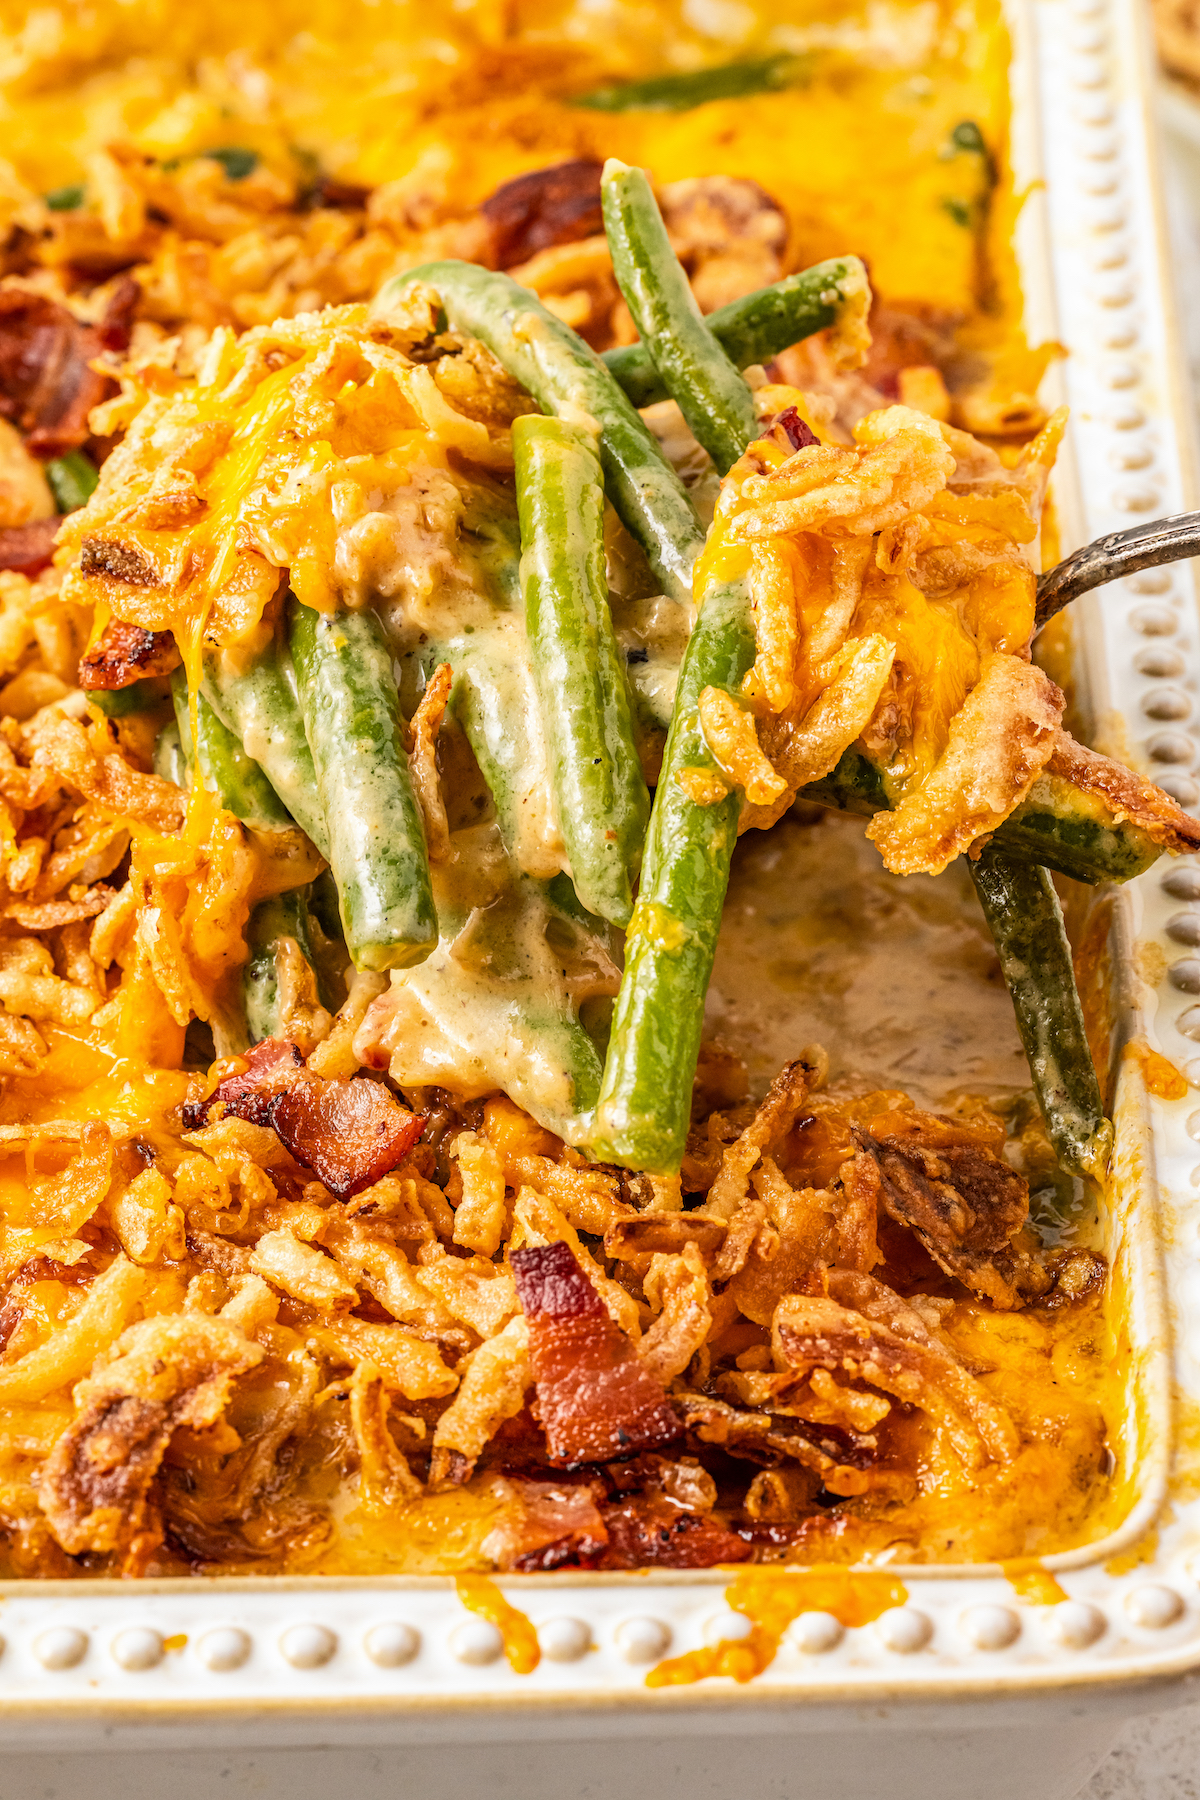 A serving spoon lifting a serving of green bean casserole with cheese out of a glass dish.